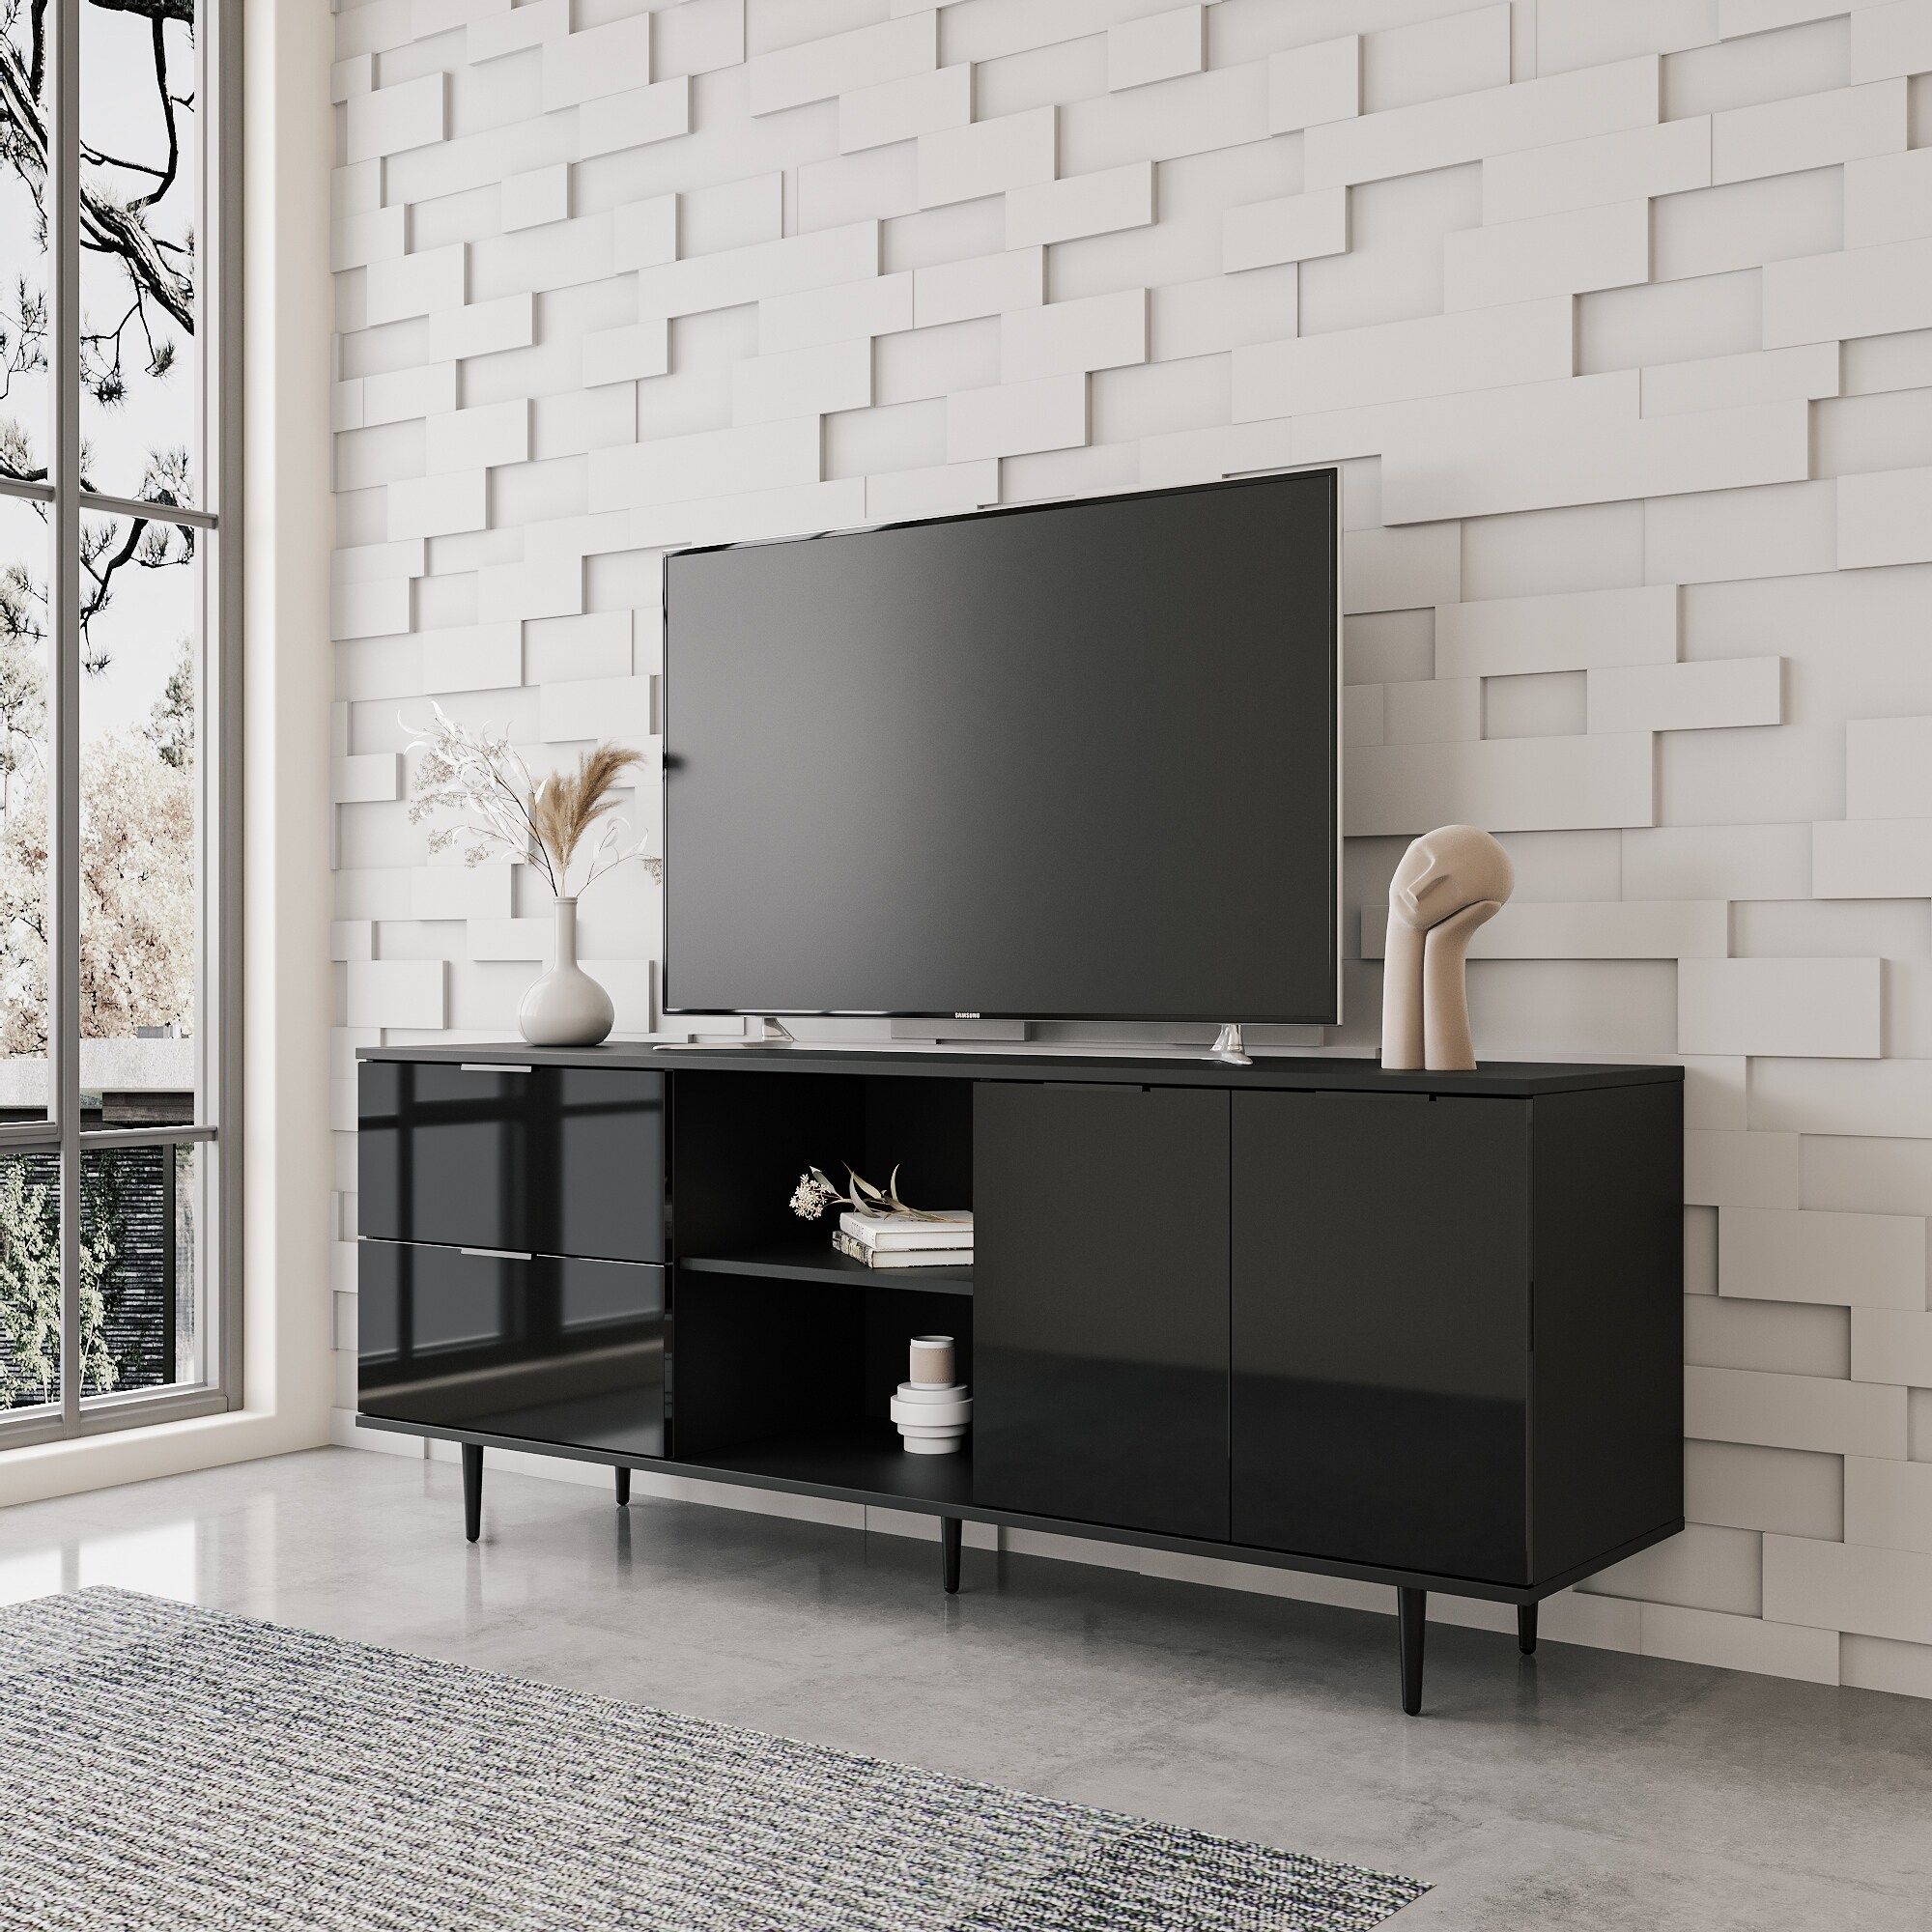 Media Entertainment Center Tv Cabinet With 3 Storage Cabinet – Bed Bath &  Beyond – 39170251 Pertaining To Entertainment Center With Storage Cabinet (View 13 of 15)